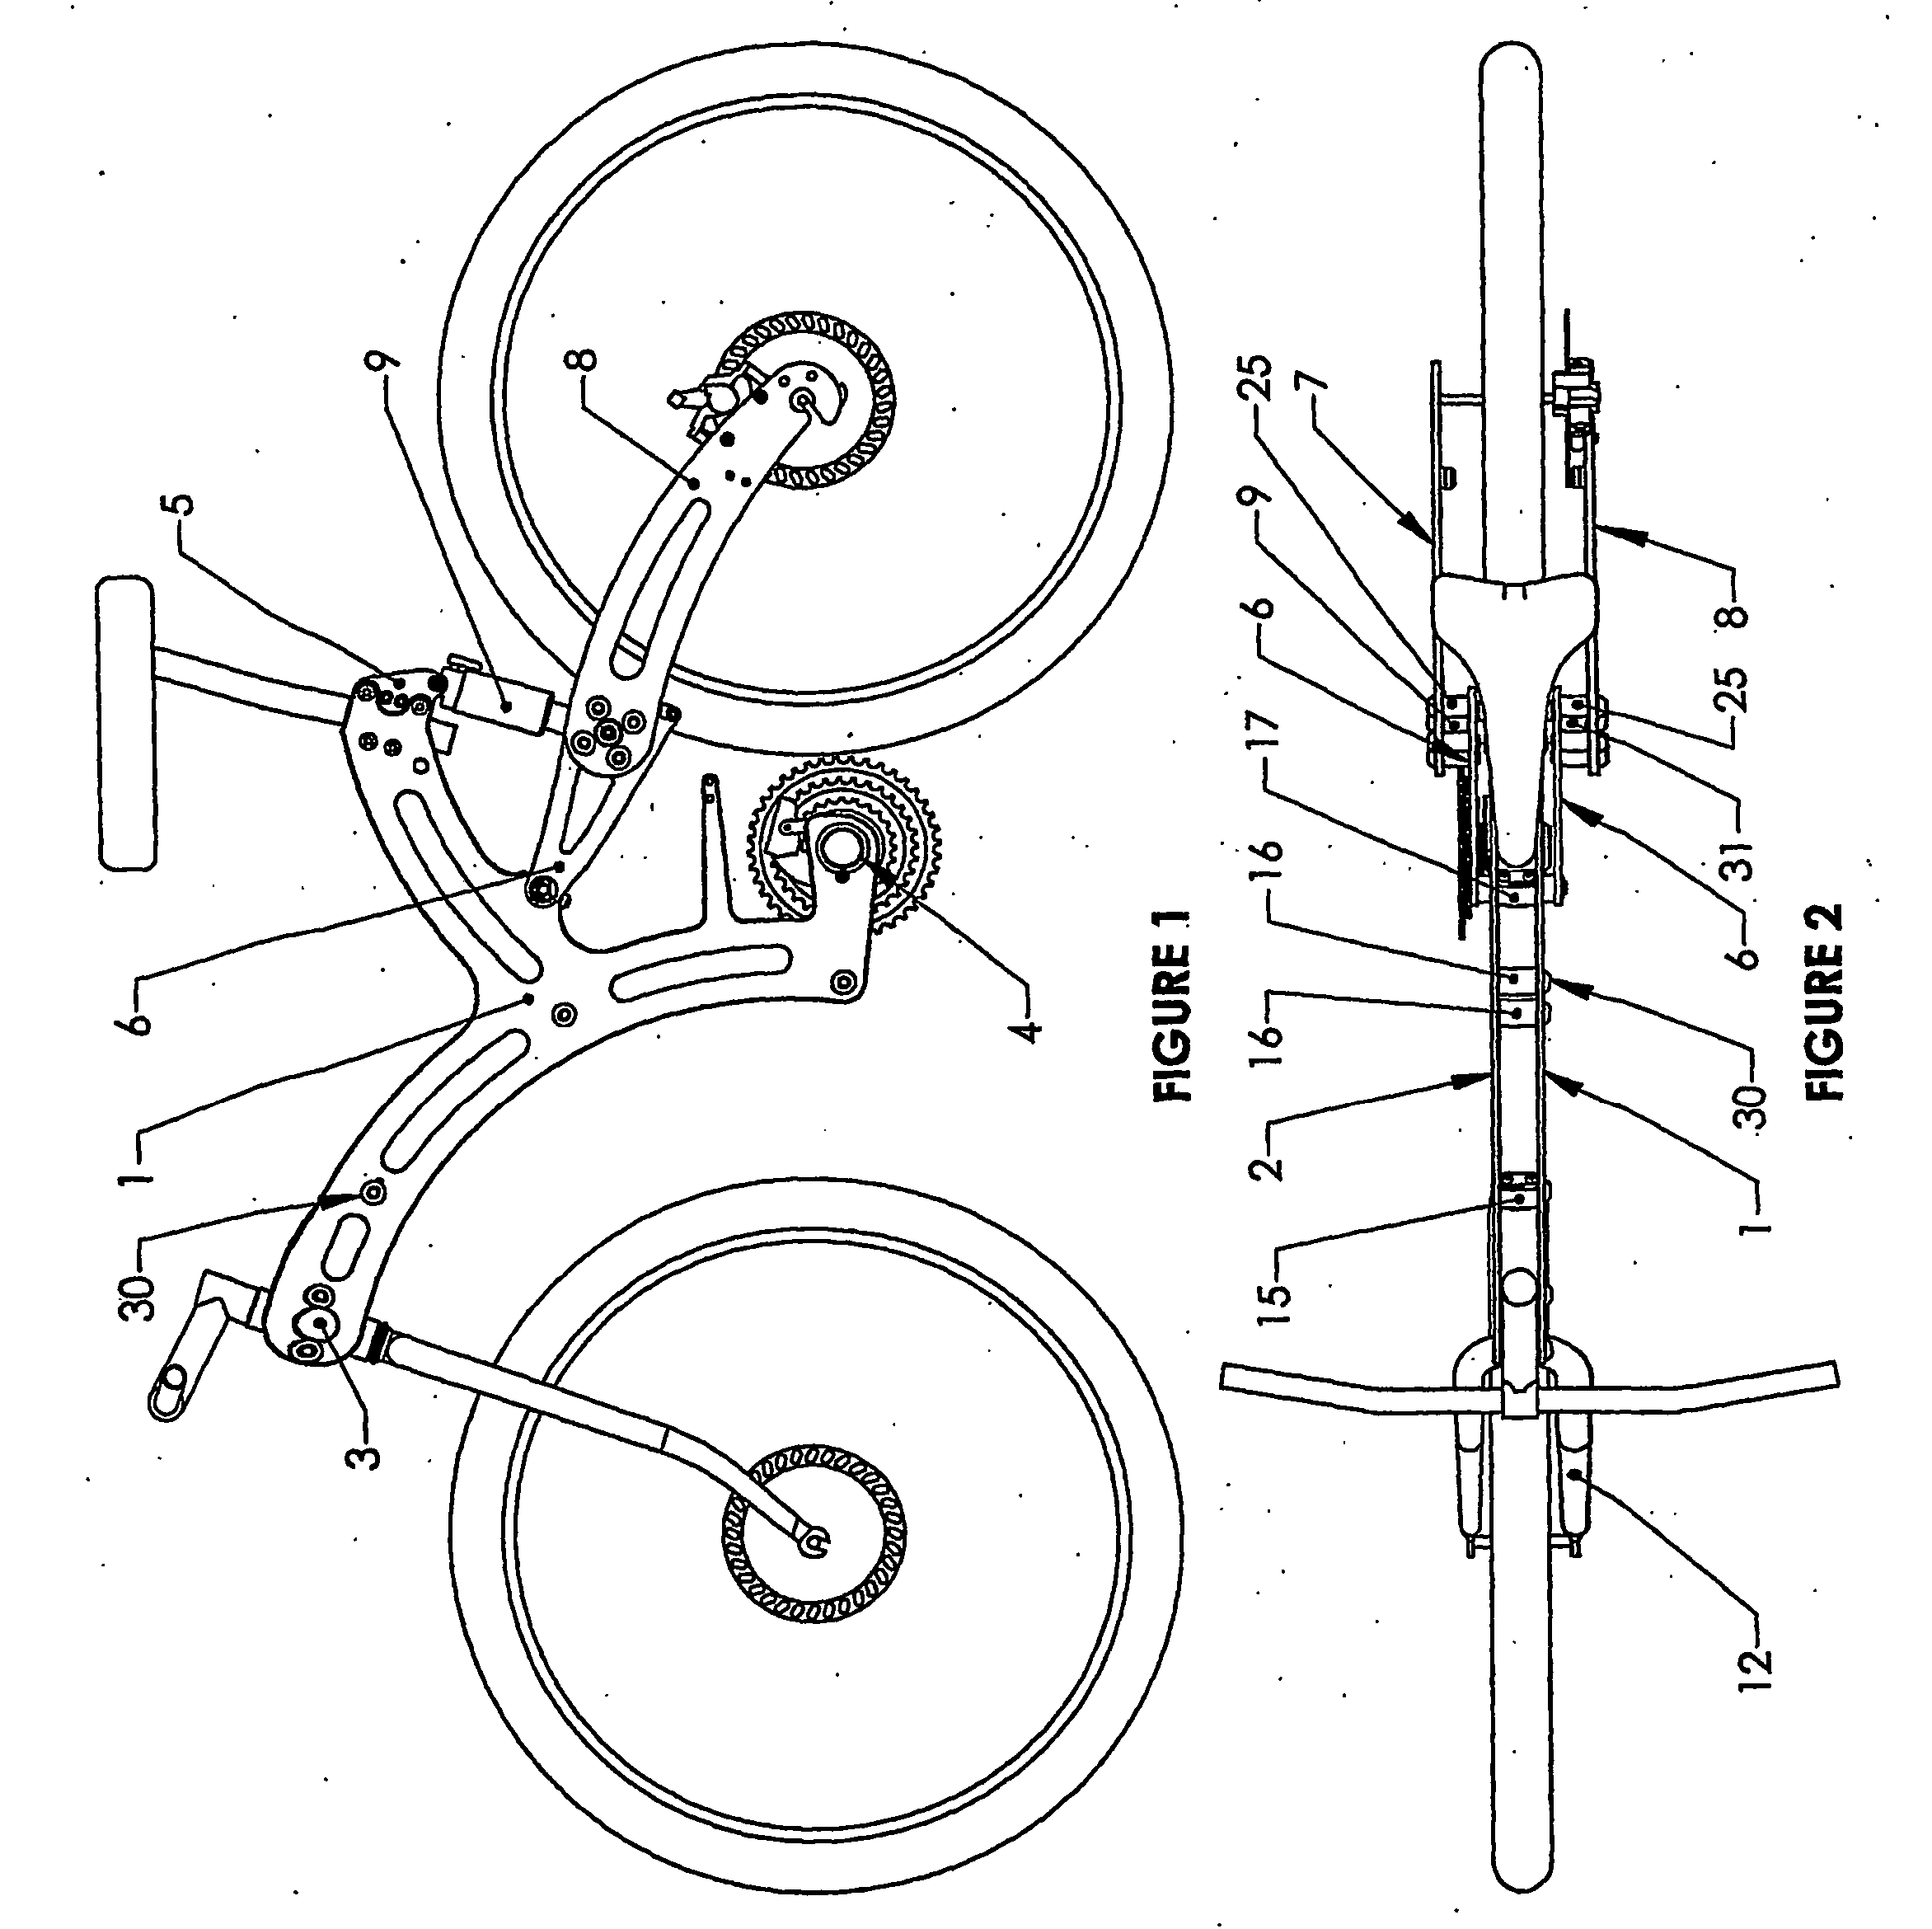 Folding bicycle constructed from plate frame elements